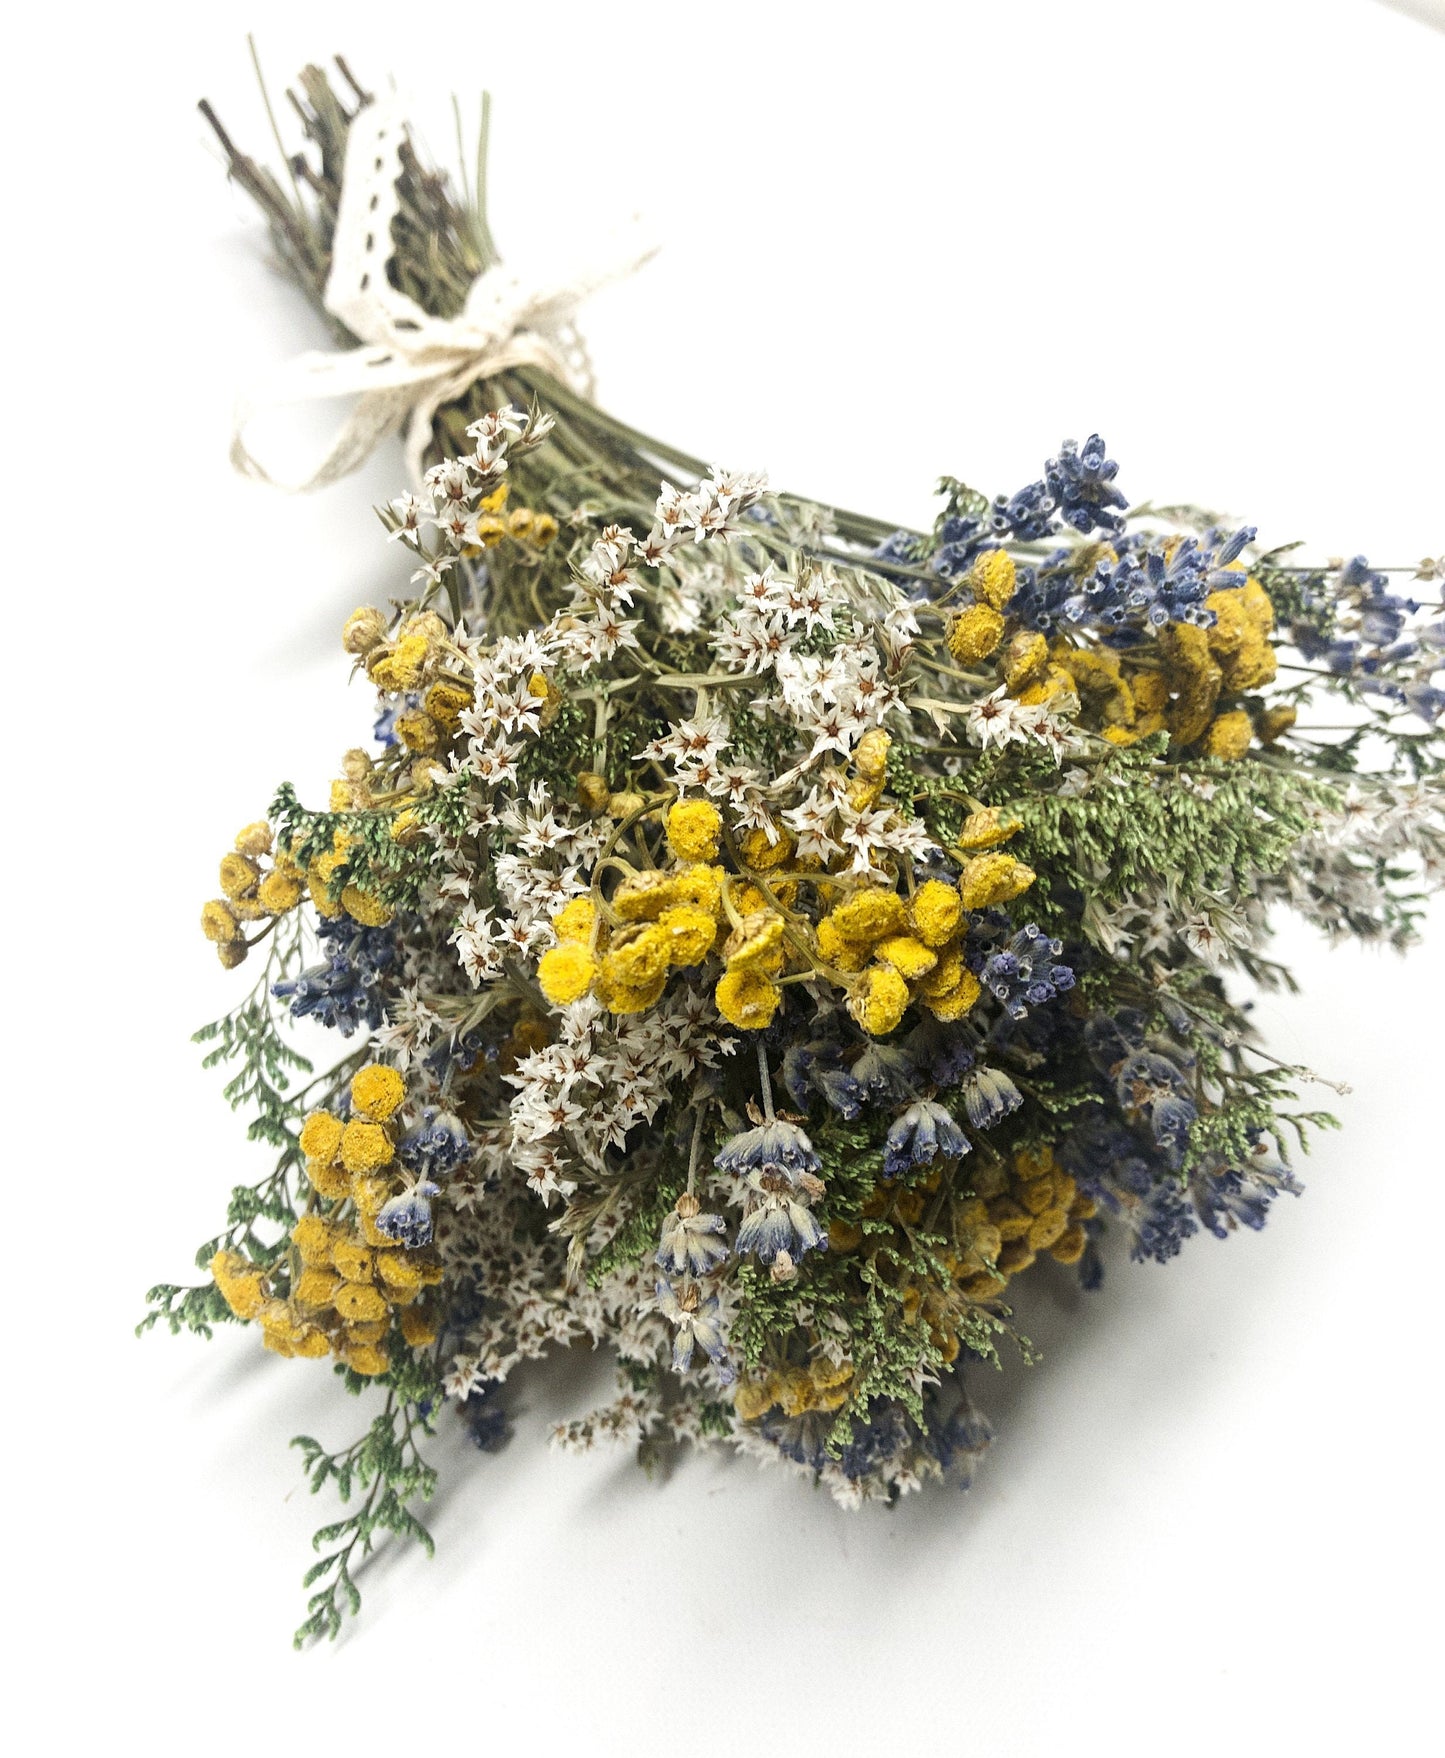 Fall Wedding, Dried Bouquet, Fall Details, Simple, Decoration, House Decor, Yellow, White, Green, Blue, Lavender, Rustic, Natural